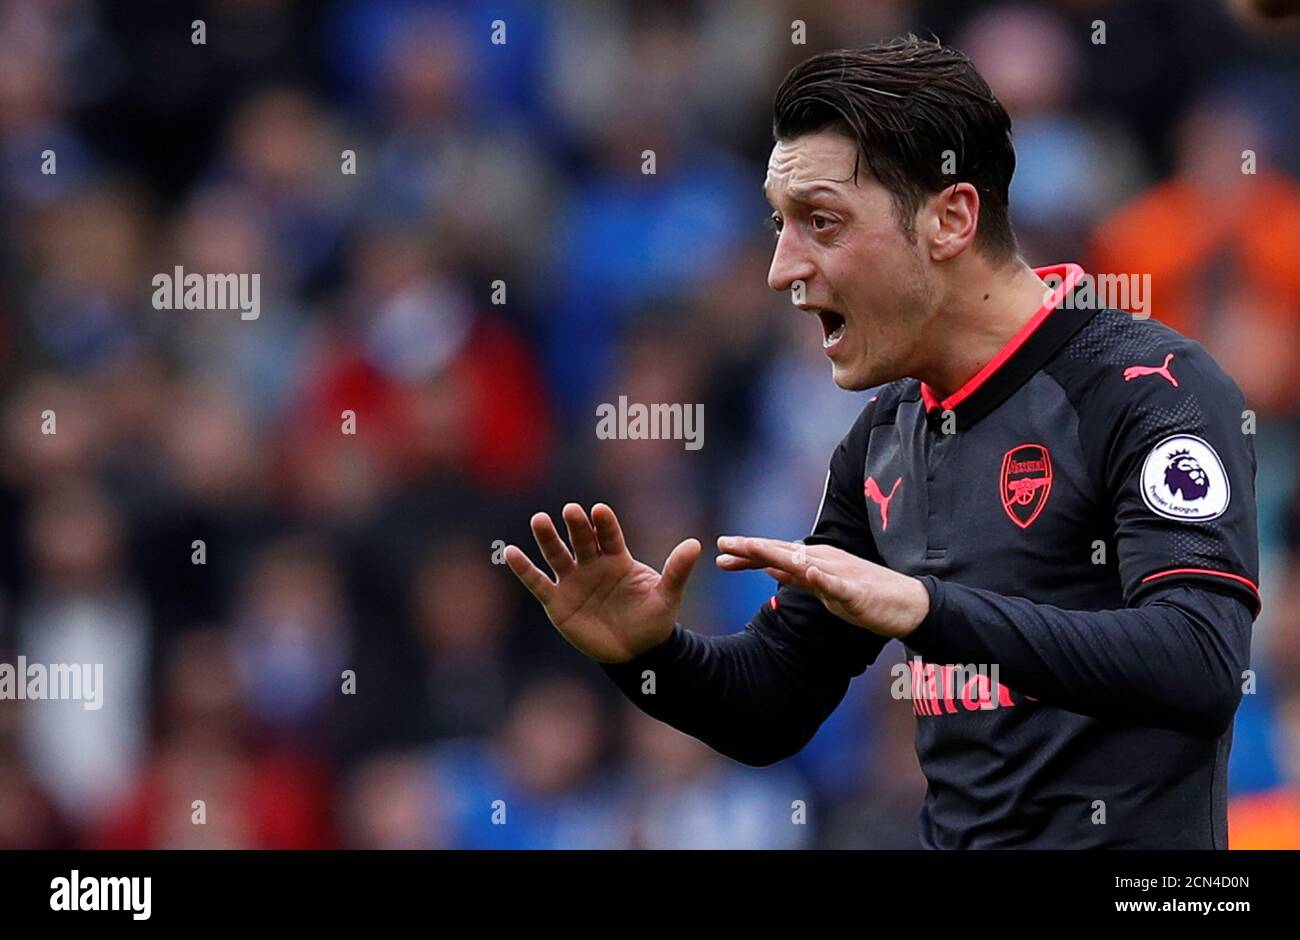 Soccer Football - Premier League - Brighton & Hove Albion vs Arsenal - The American Express Community Stadium, Brighton, Britain - March 4, 2018   Arsenal's Mesut Ozil looks dejected after Brighton's second goal scored by Glenn Murray   REUTERS/Eddie Keogh    EDITORIAL USE ONLY. No use with unauthorized audio, video, data, fixture lists, club/league logos or 'live' services. Online in-match use limited to 75 images, no video emulation. No use in betting, games or single club/league/player publications.  Please contact your account representative for further details. Stock Photo